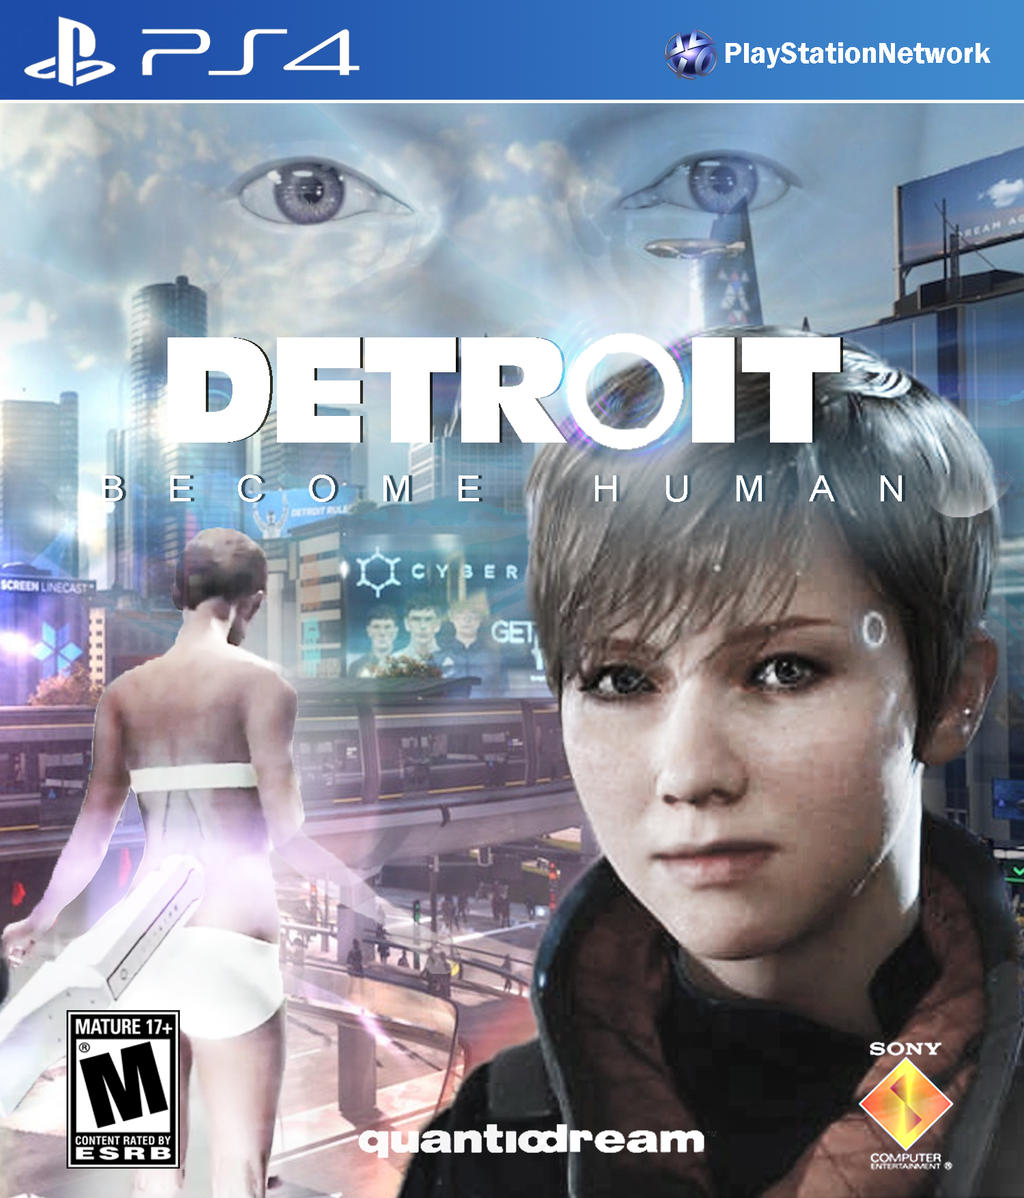 Clancy Regnskab sponsoreret Detroit: Become Human PS4 Cover Concept by Domestrialization on DeviantArt